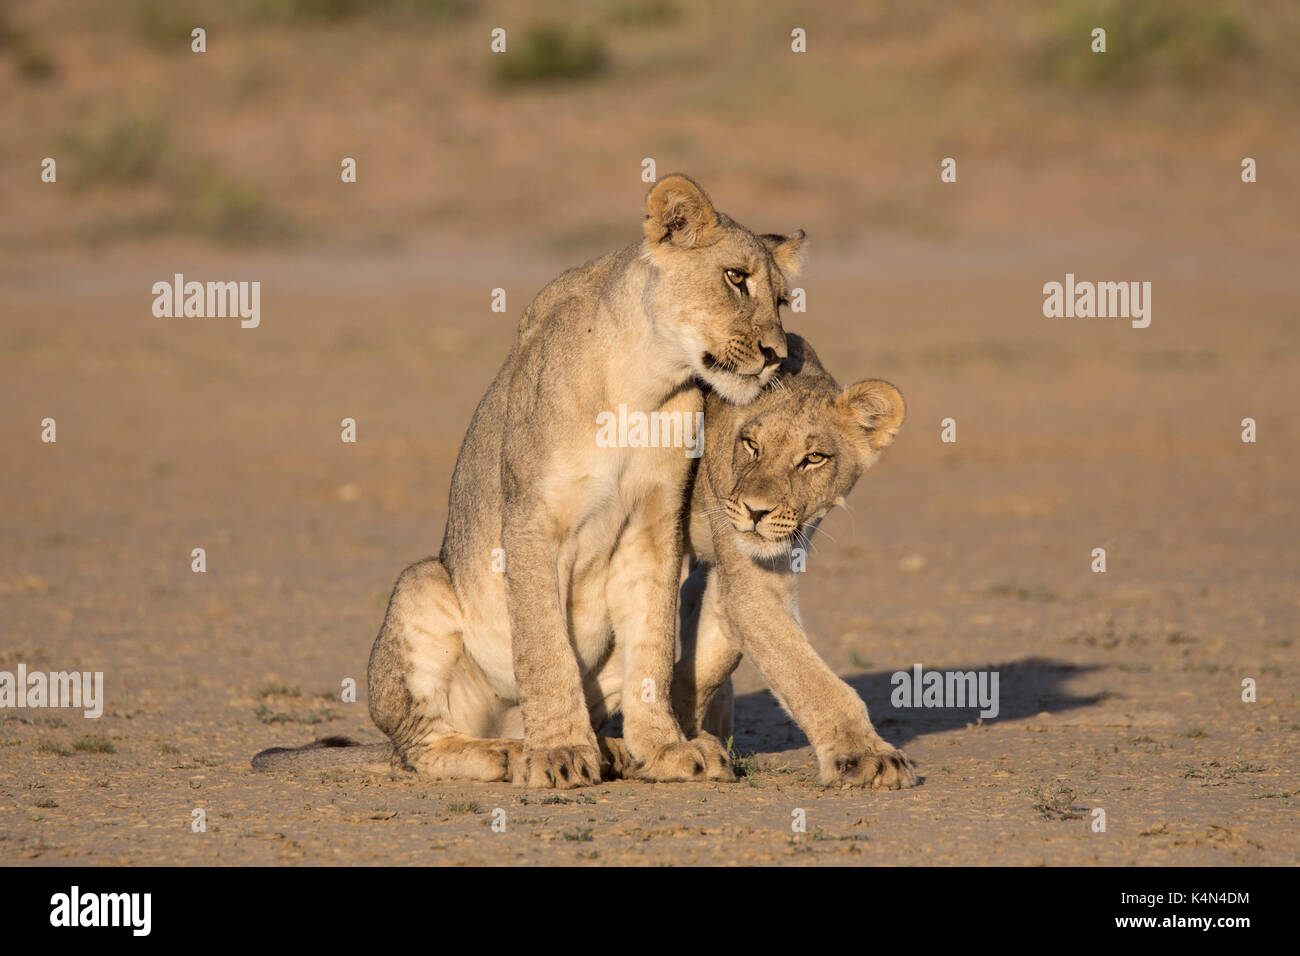 Young lions (Panthera leo), Kgalagadi Transfrontier Park, Northern Cape, South Africa, Africa Stock Photo